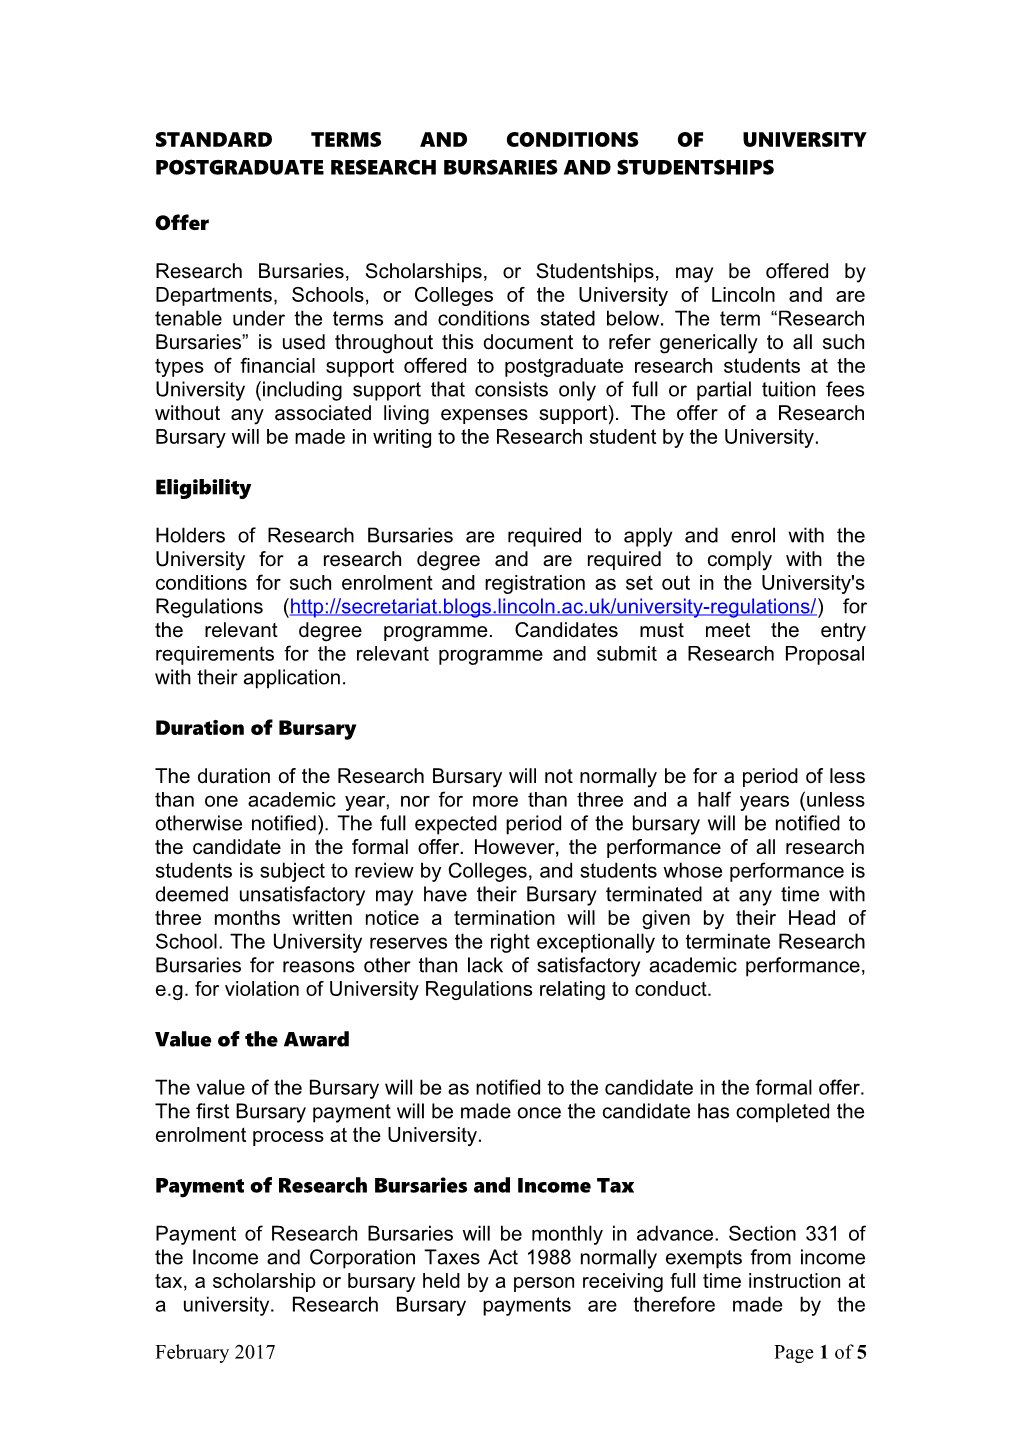 Appendix 13: Standard University Terms and Conditions for Research Bursaries